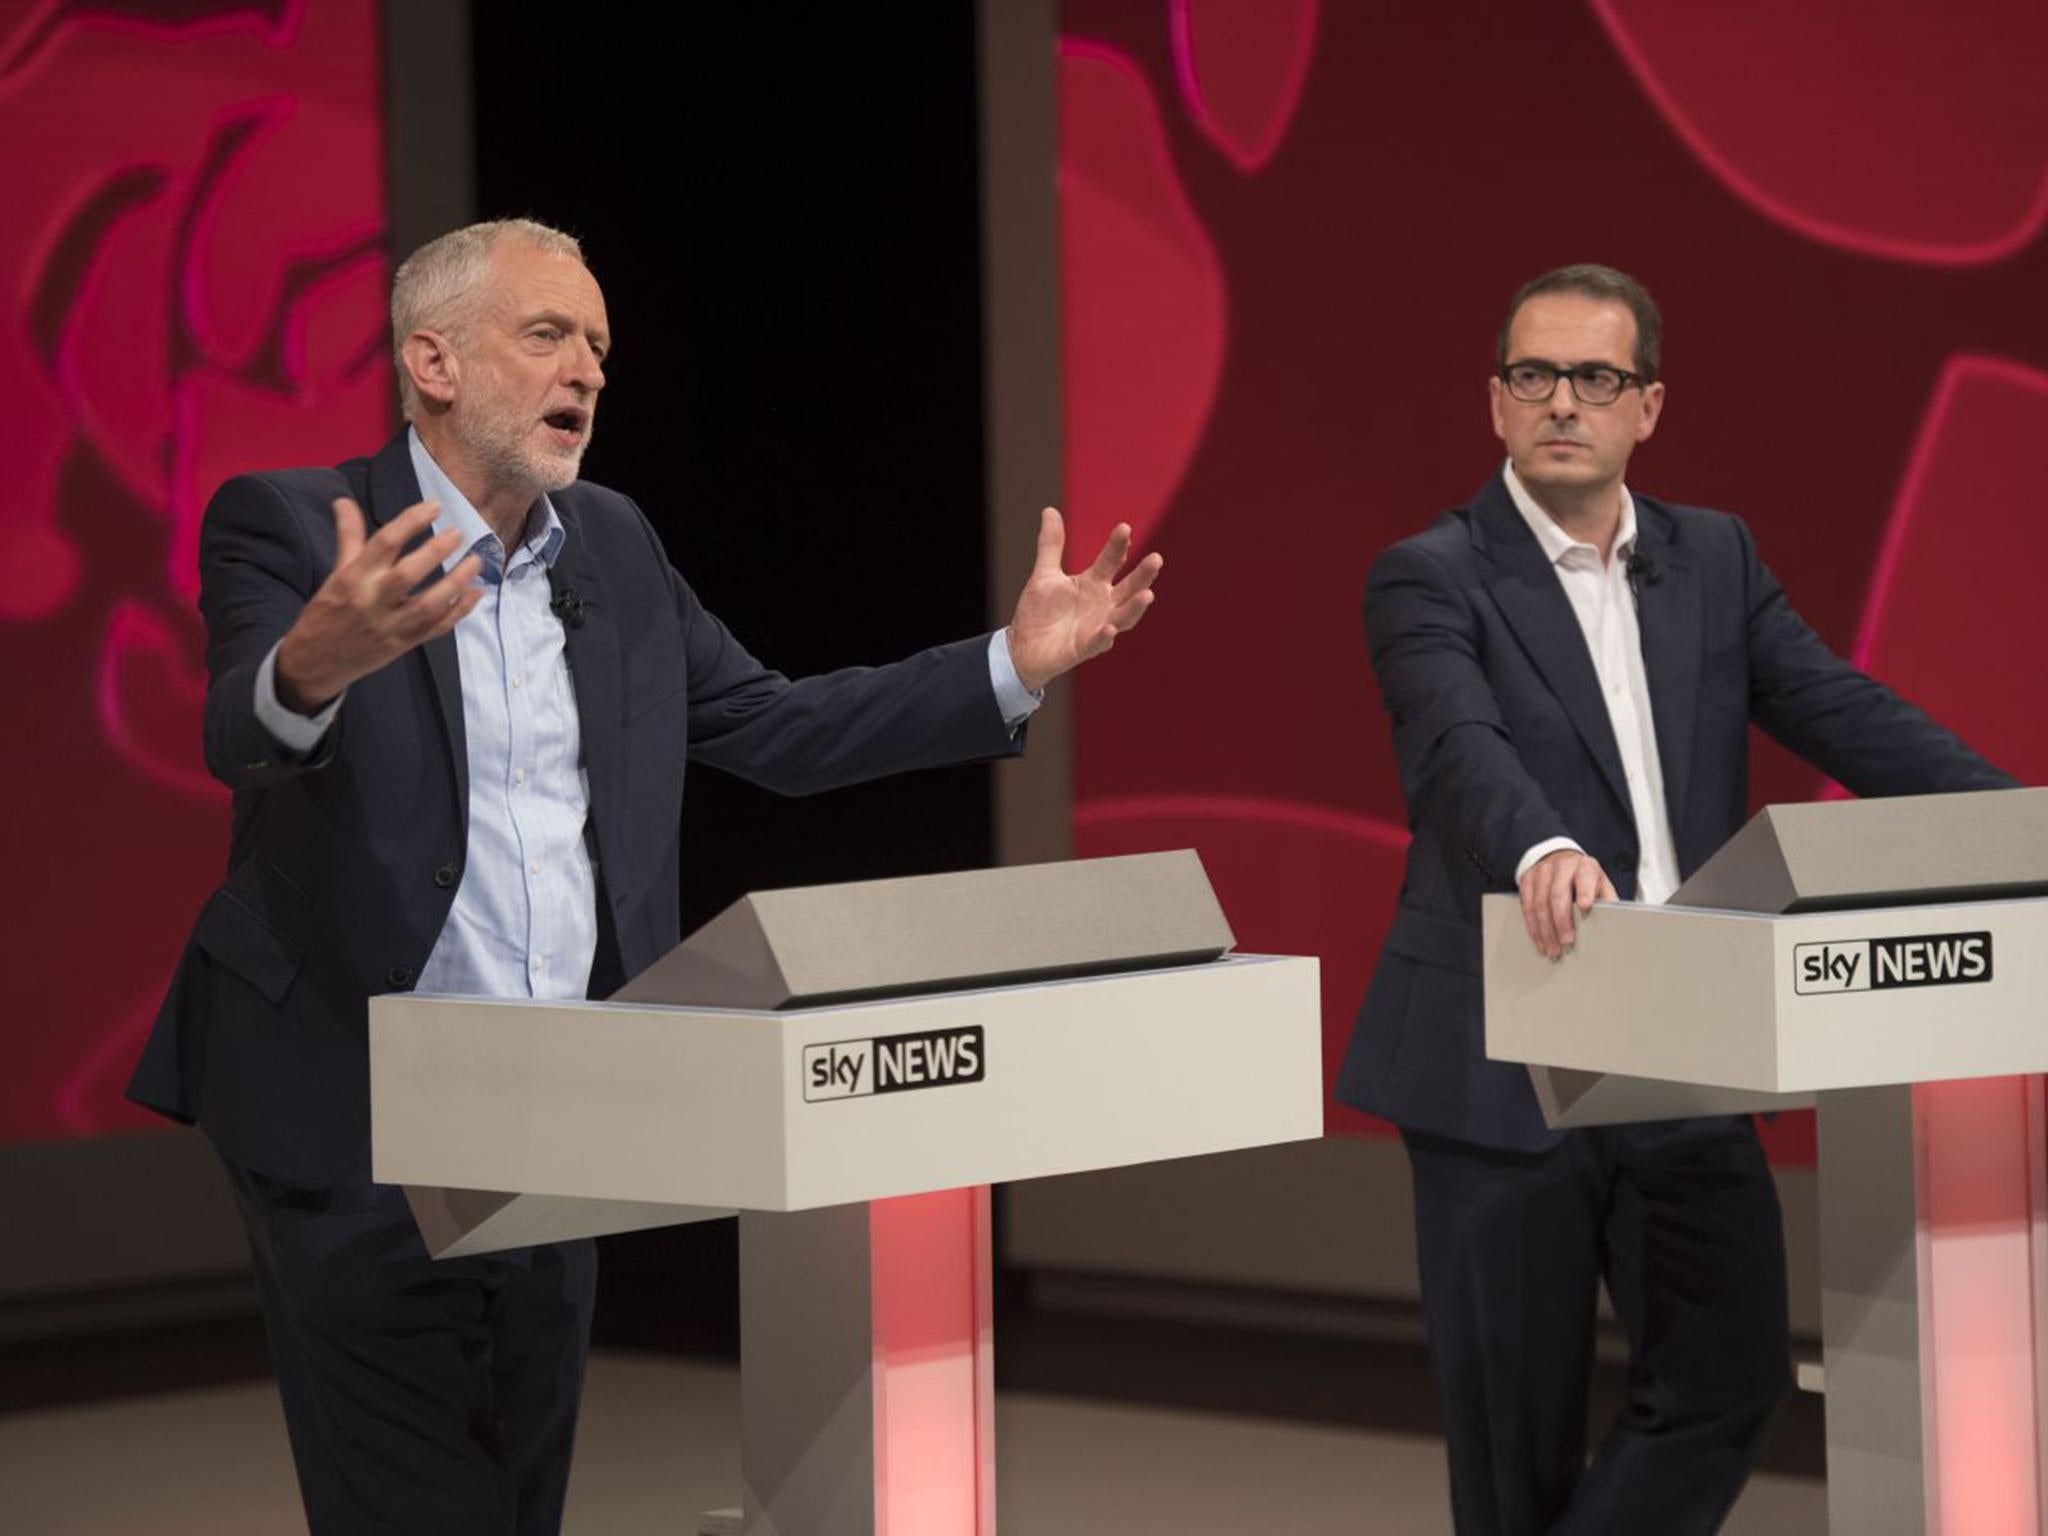 Corbyn (left) and Smith take part in a hustings debate in Isleworth